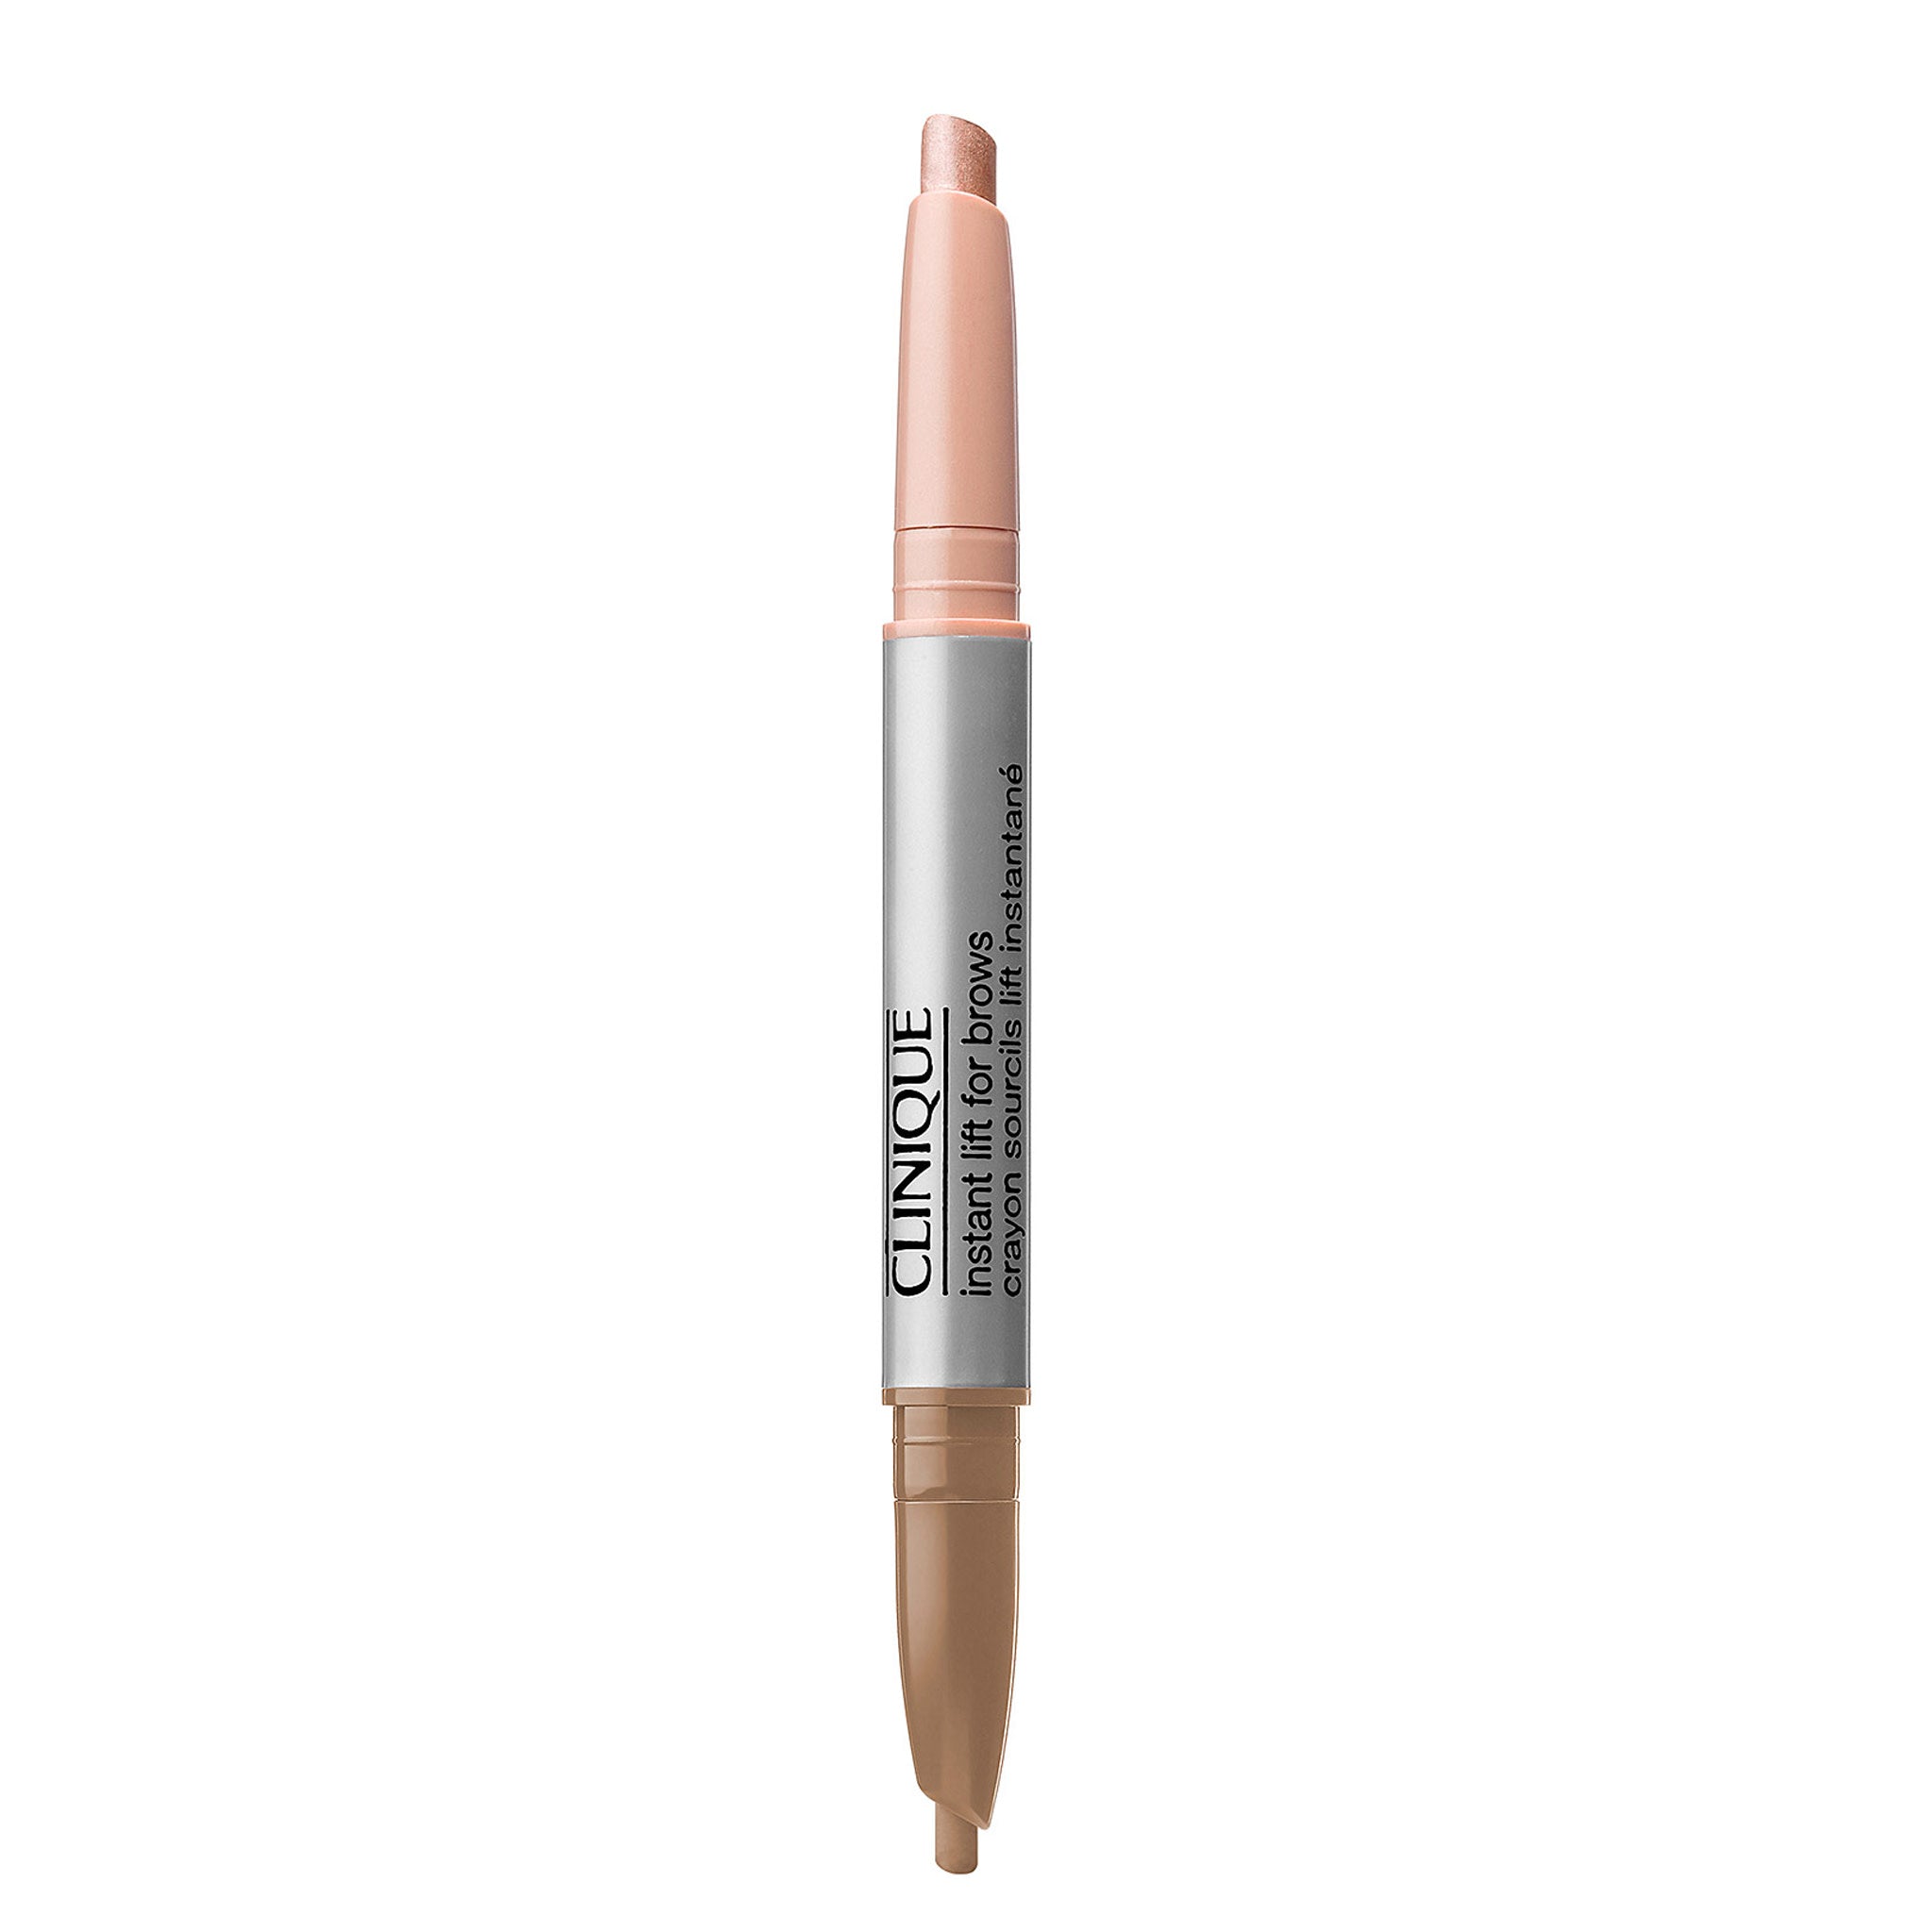 Clinique Instant Lift For Brows Color/Shade variant: Soft Blonde main image.